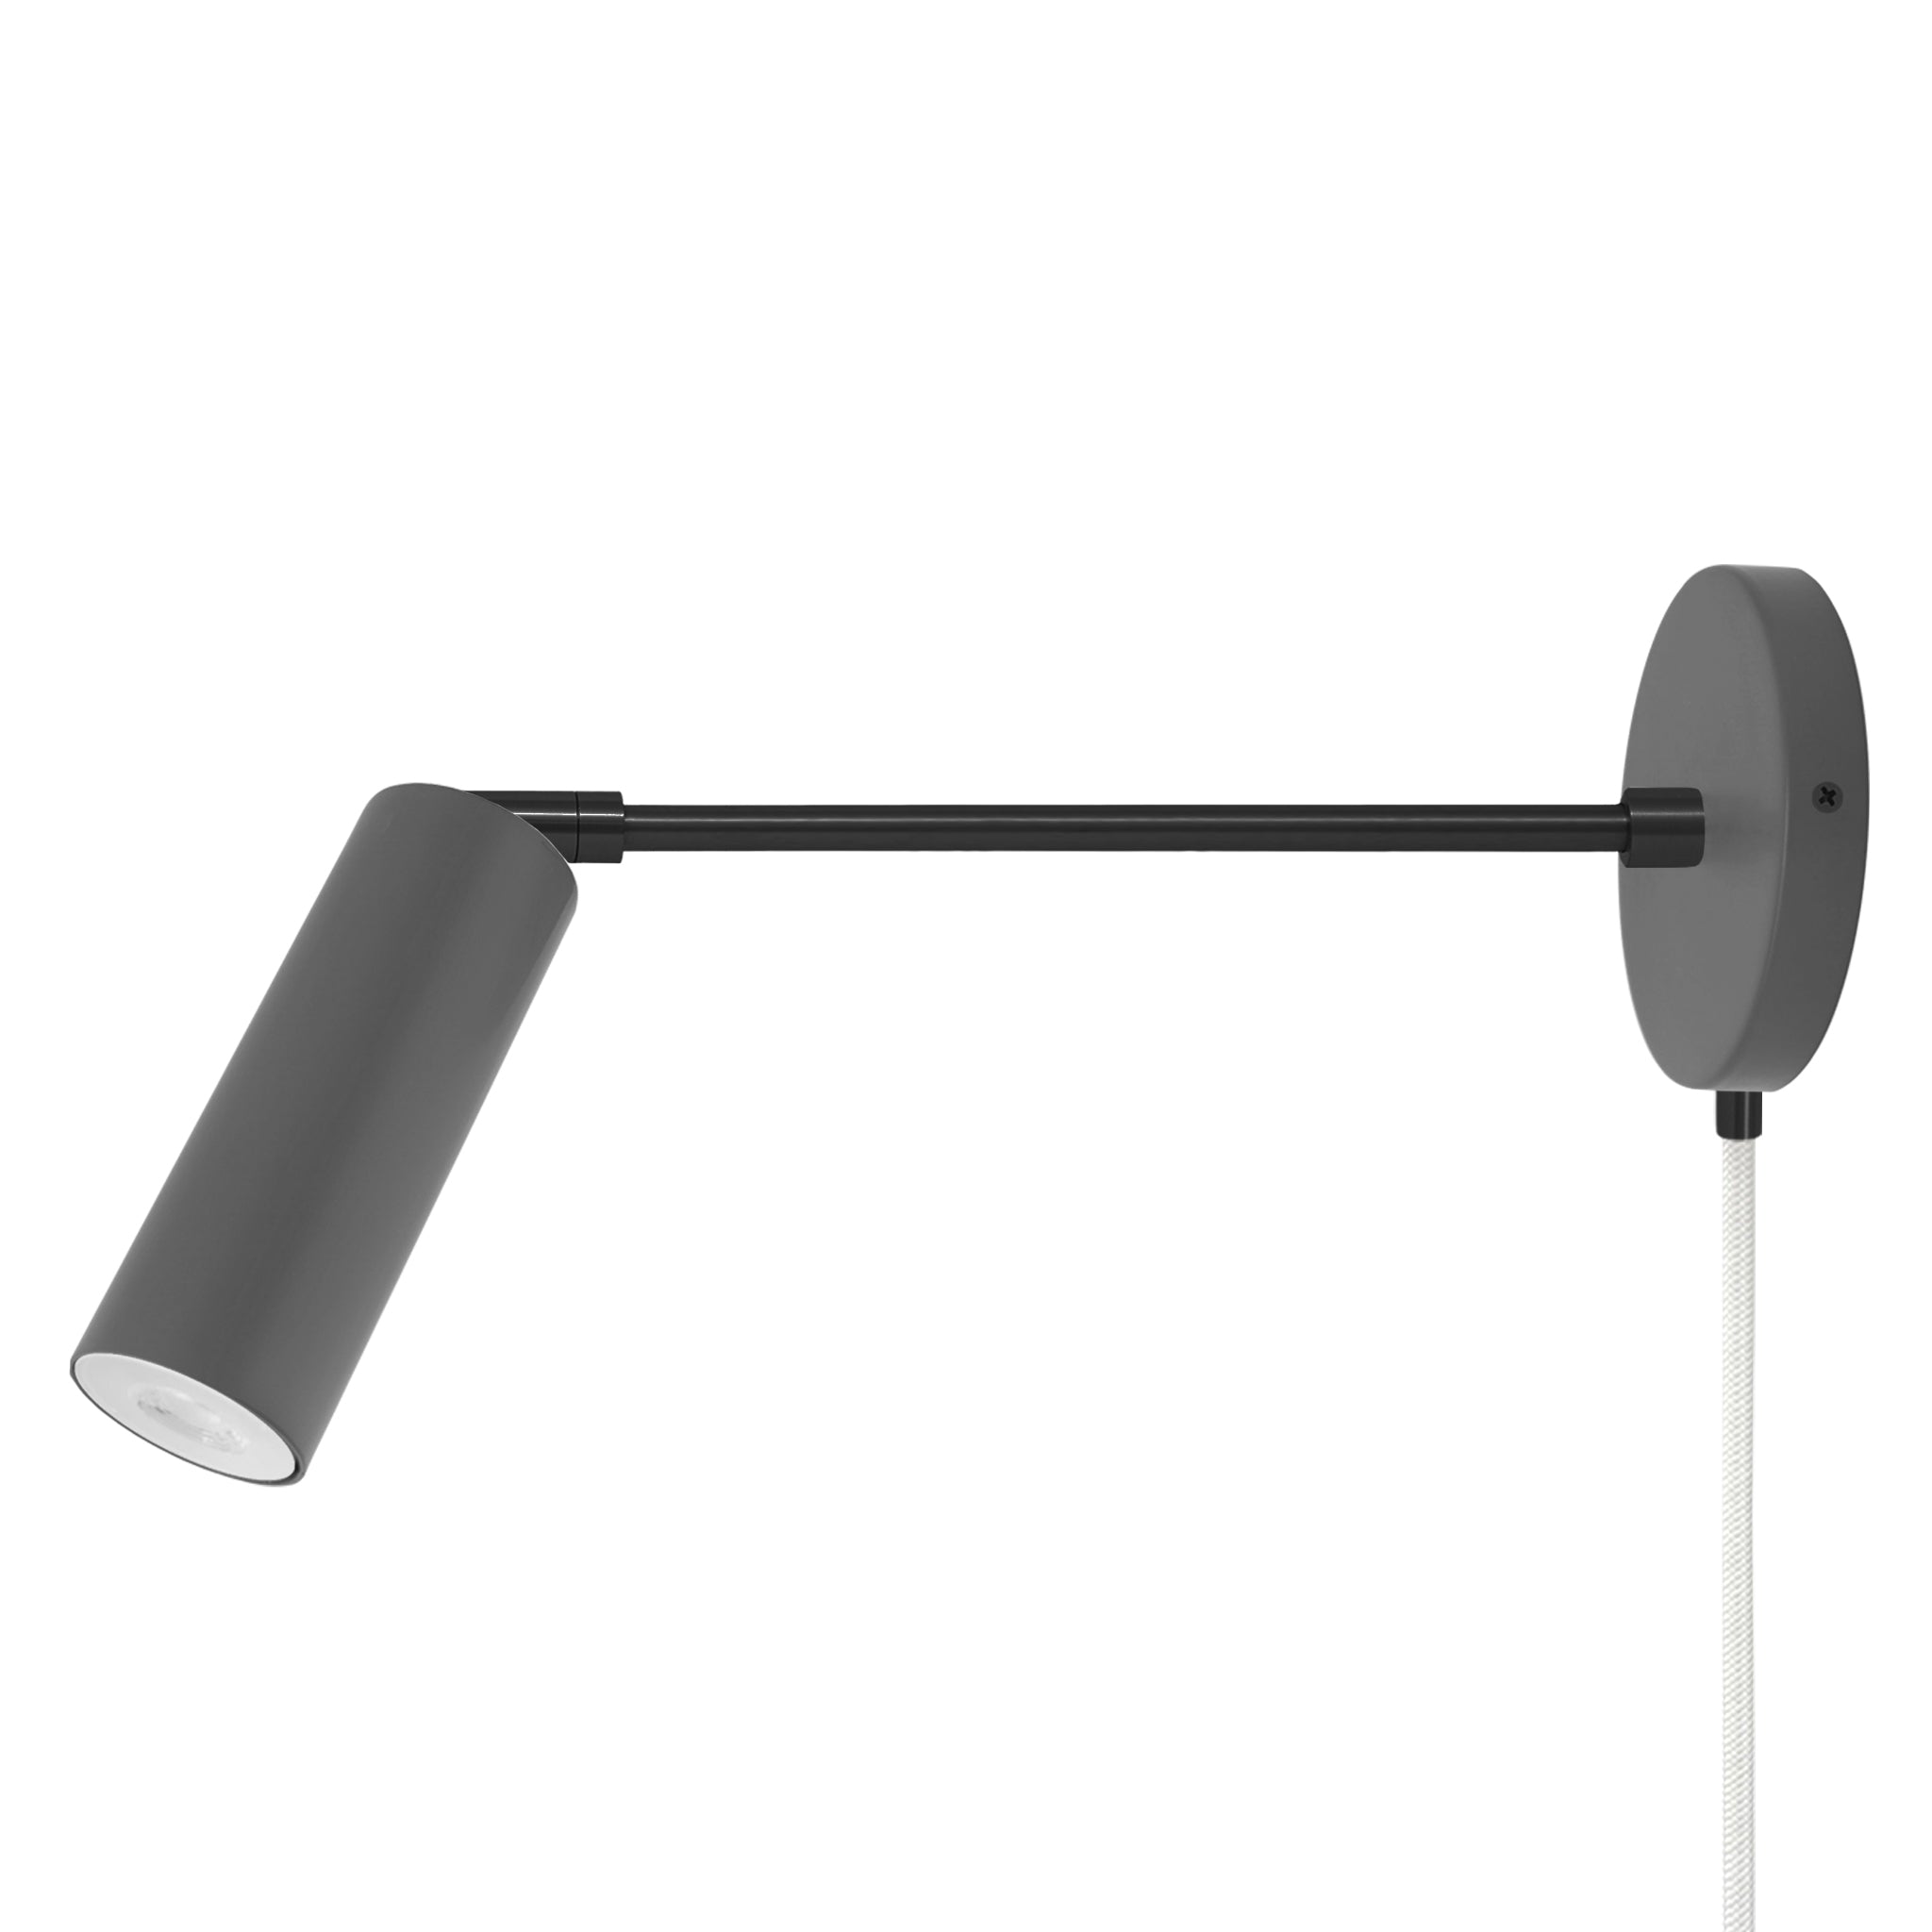 Black and charcoal color Reader plug-in sconce 10" arm Dutton Brown lighting